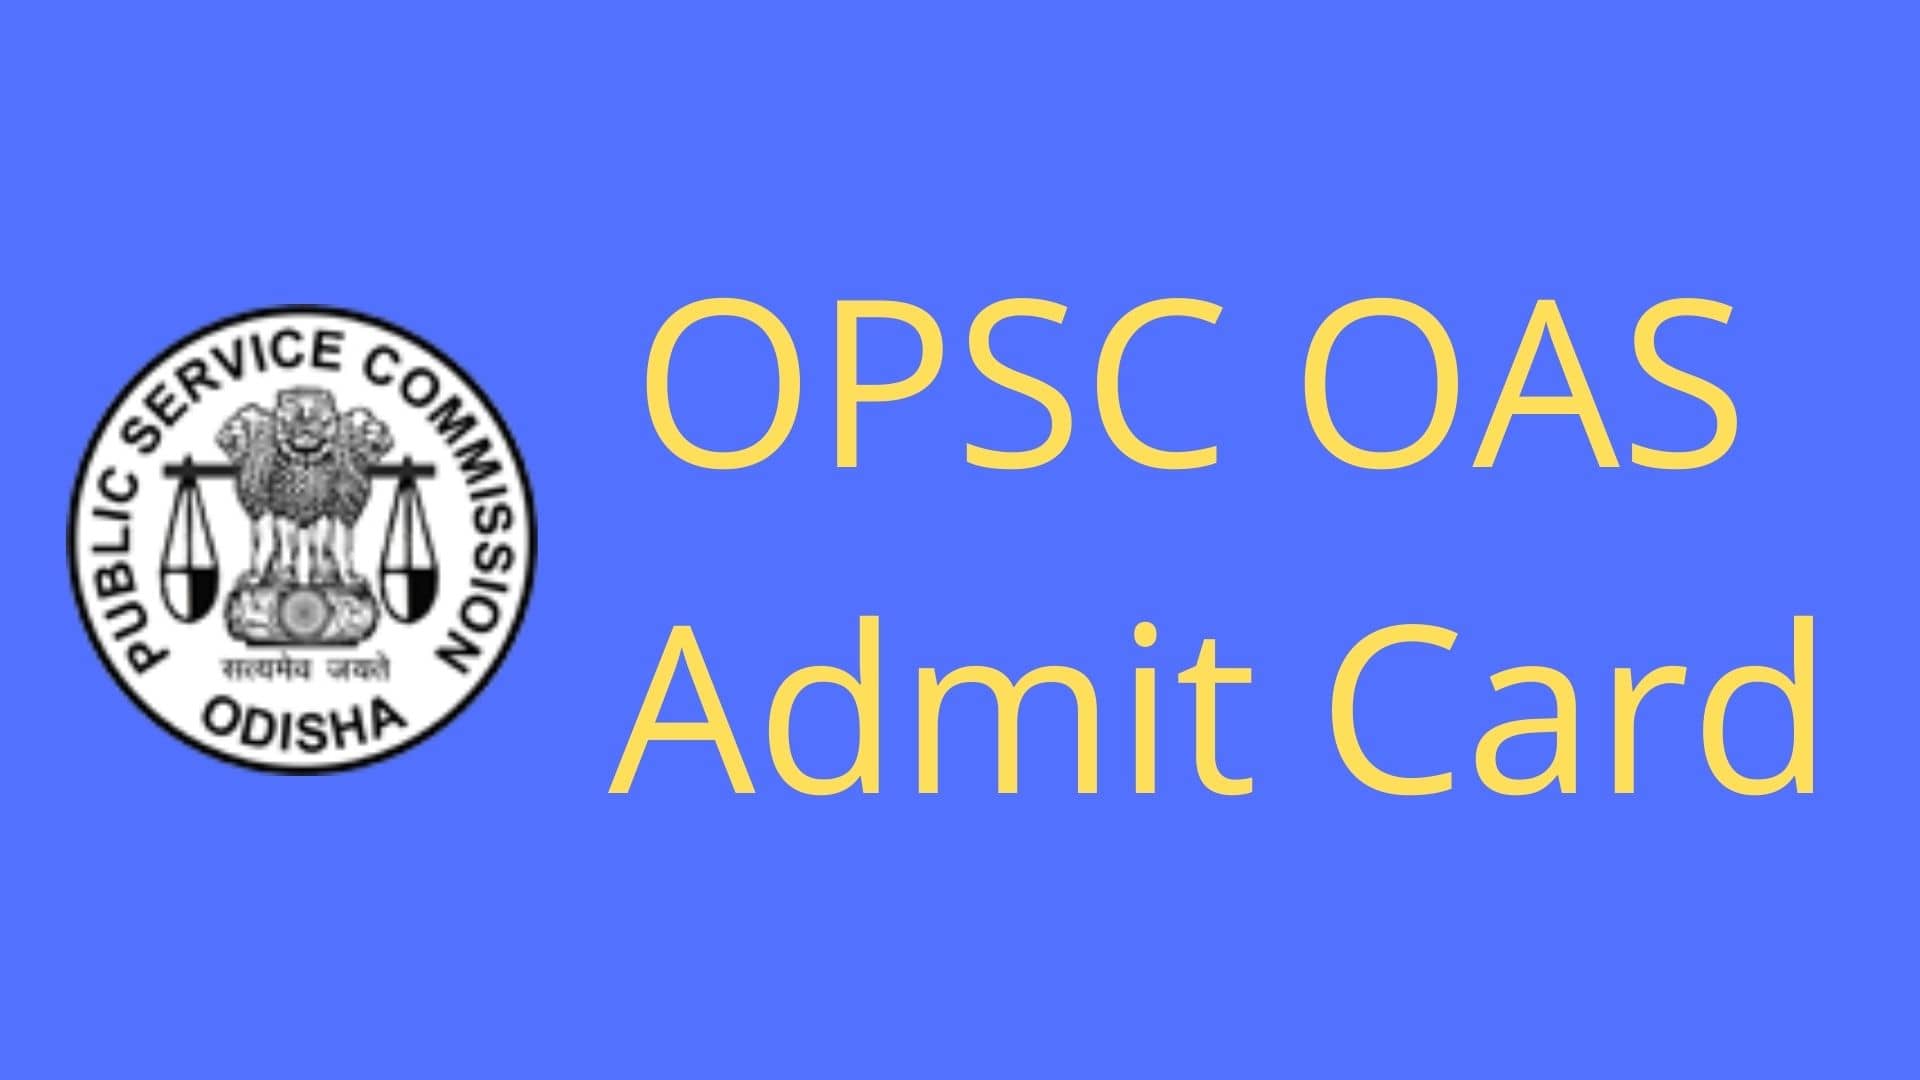 OPSC OAS Admit Card